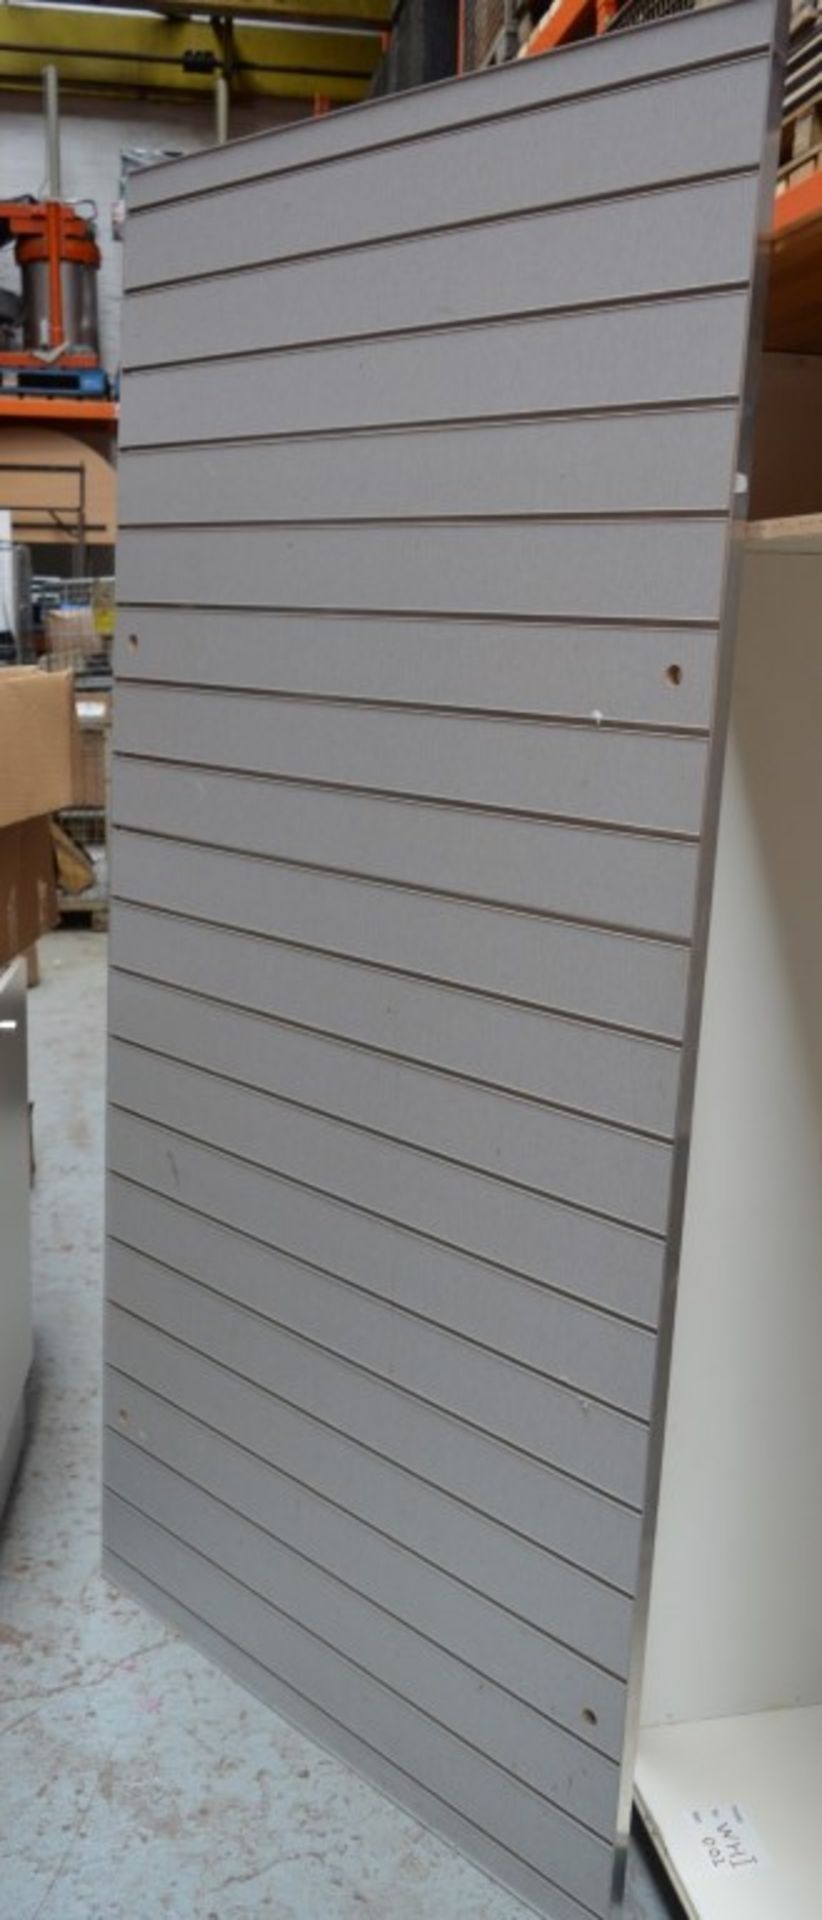 4 x Section of Retail Slat Wall With Large Selection of Slat Rails - Modern Grey Finish With - Image 4 of 4